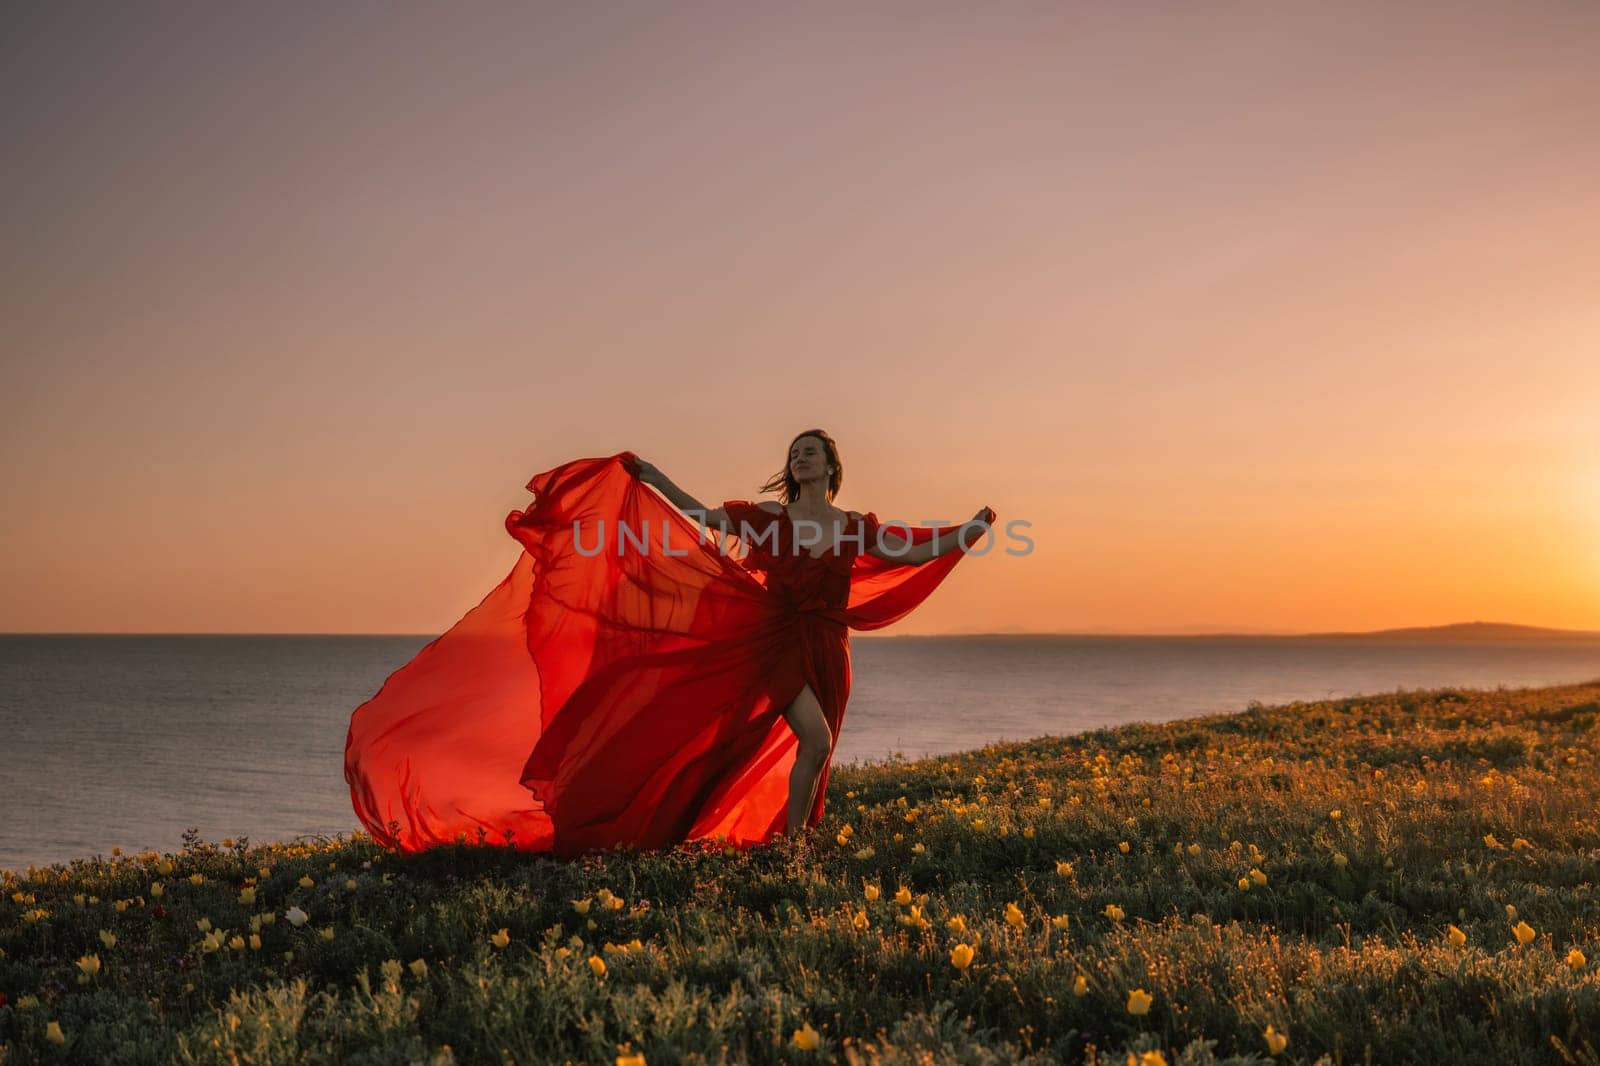 woman red dress is standing on a grassy hill overlooking the ocean. The sky is a beautiful mix of orange and pink hues, creating a serene and romantic atmosphere